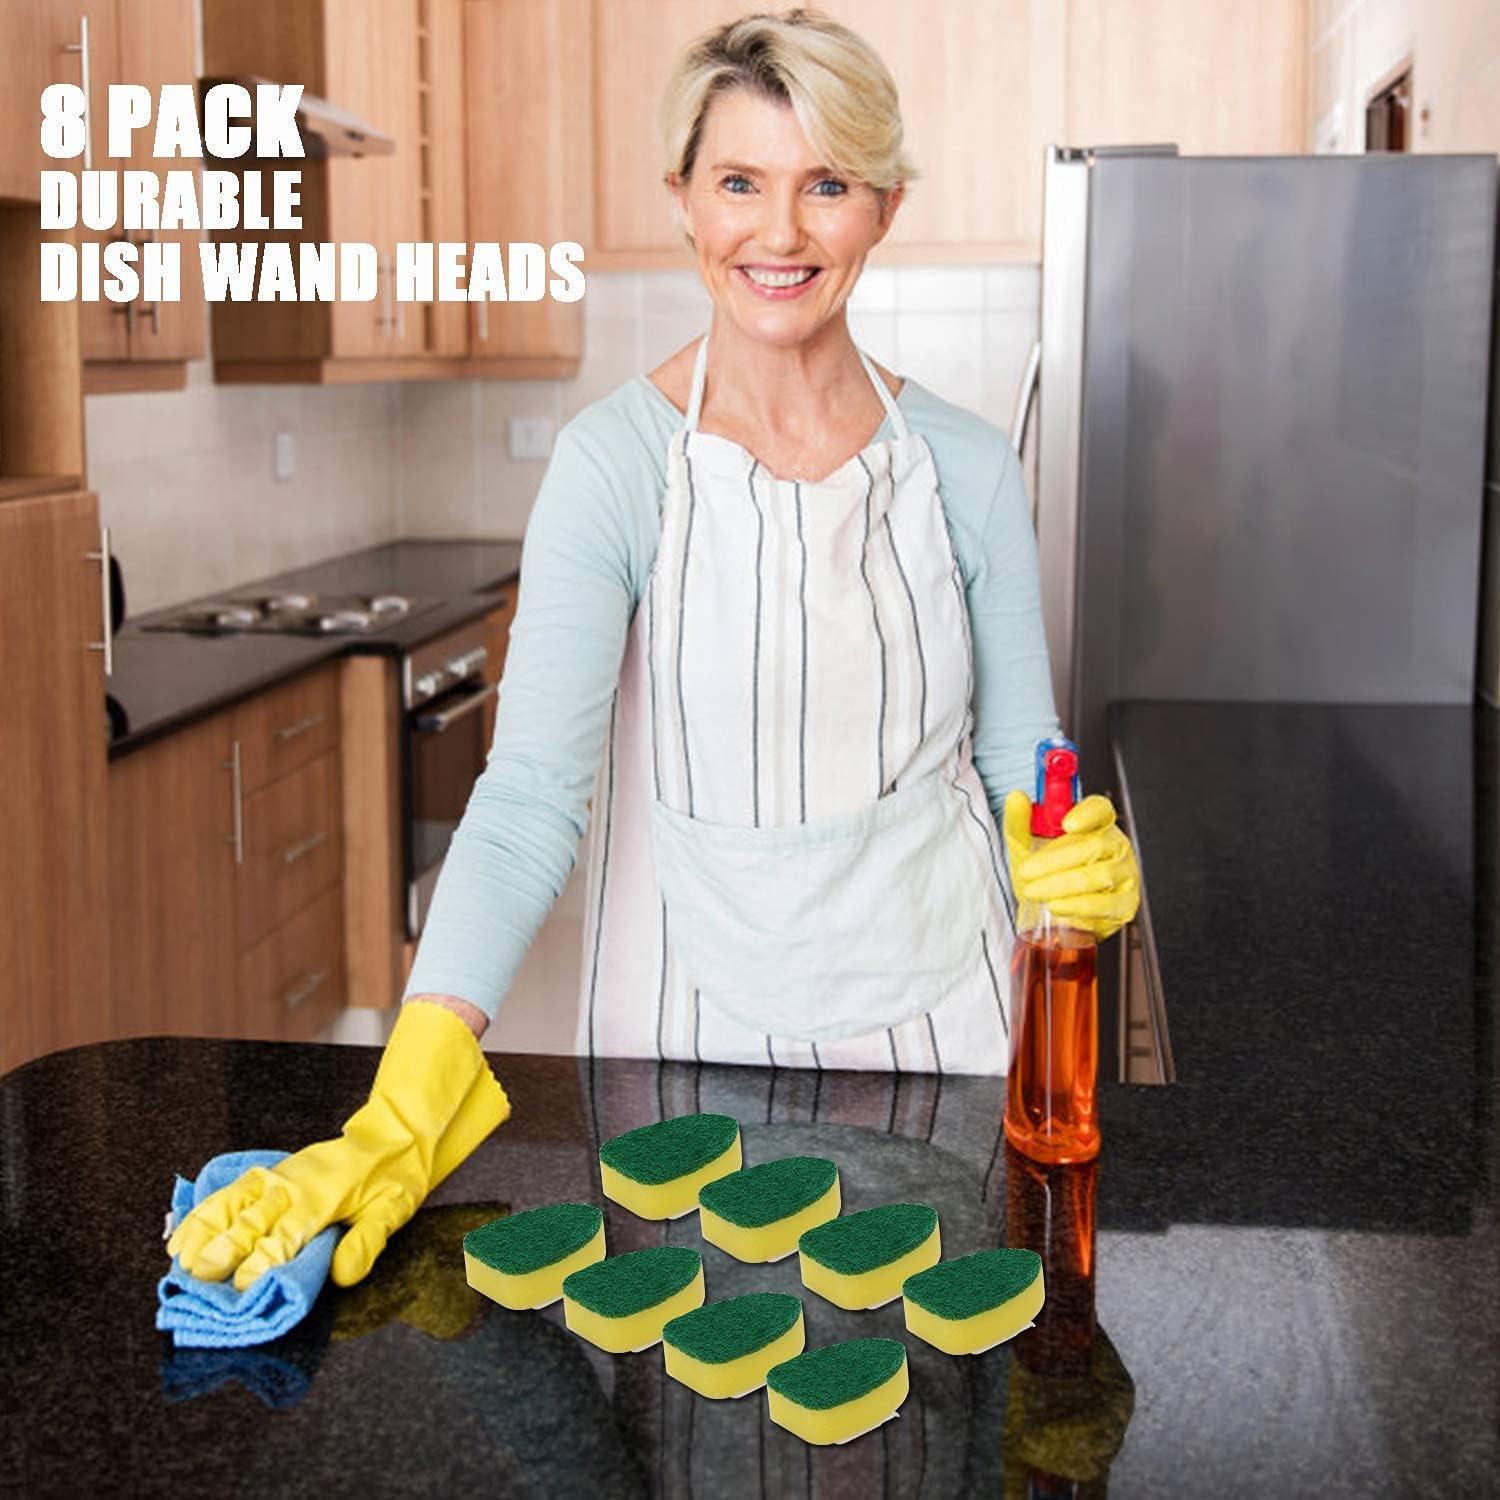 Dish Wand Refills 8Packs,Sponge Replacement Heads,Dish Wand Sponge Refill  for Kitchen Cleaning